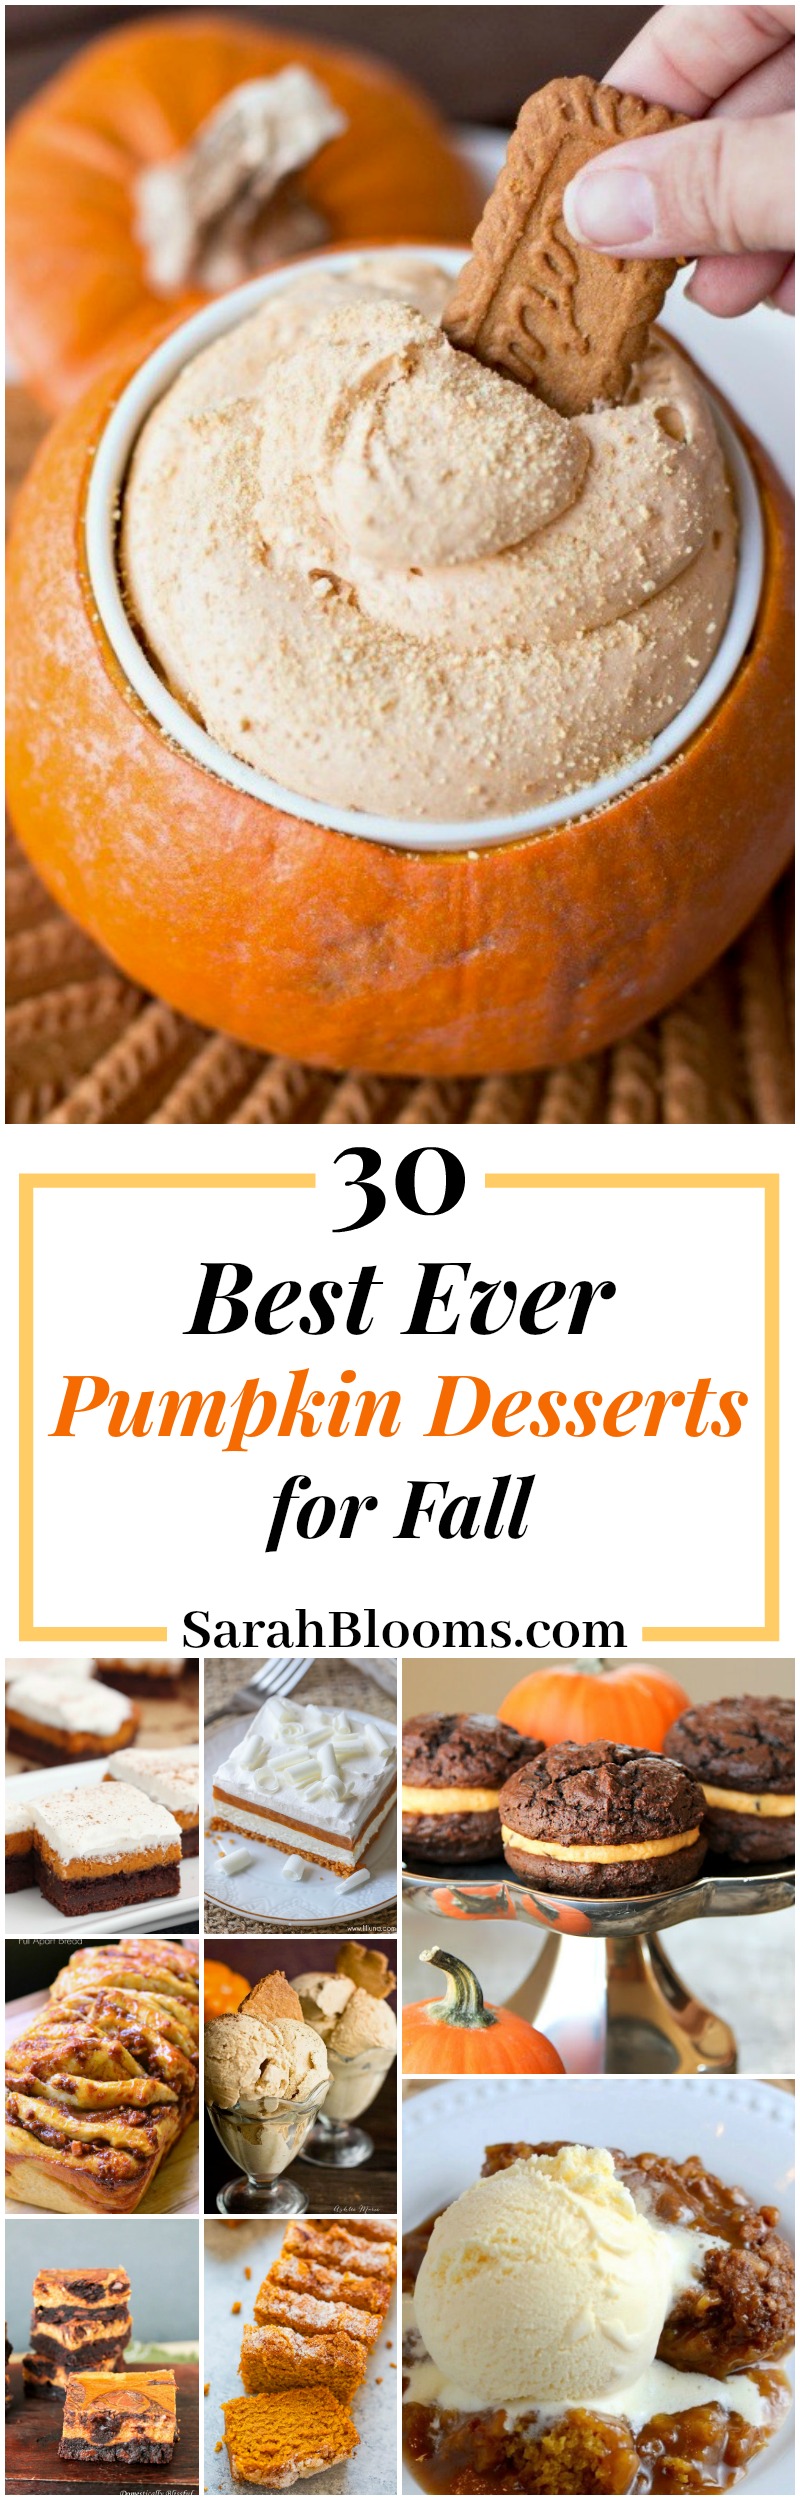 30 Ultimate Pumpkin Recipes You Need to Try This Fall